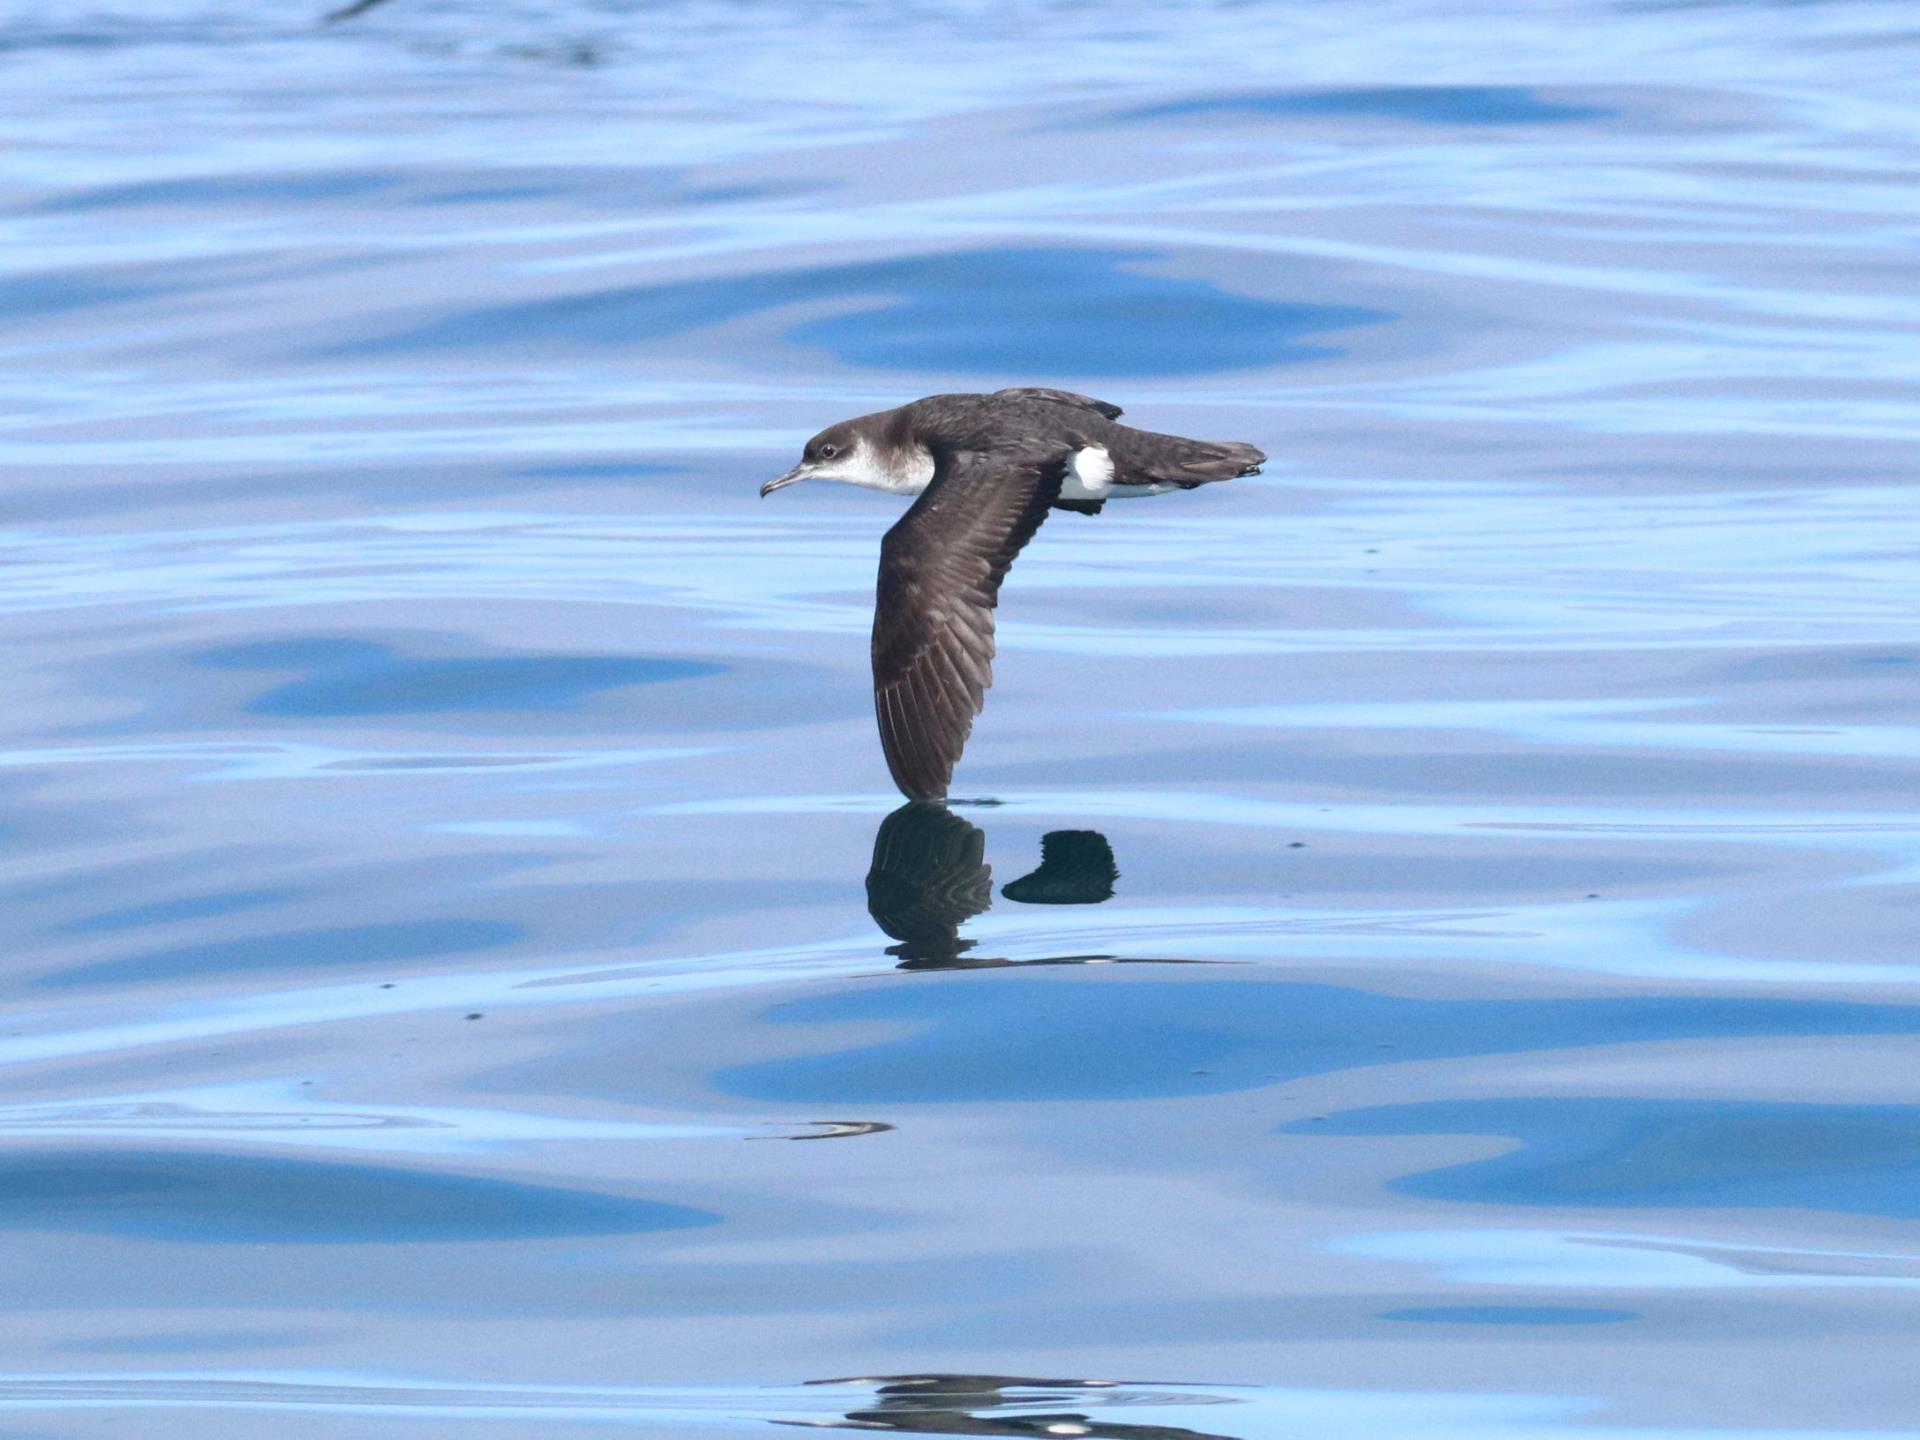 Manx Shearwater- living up to its name!